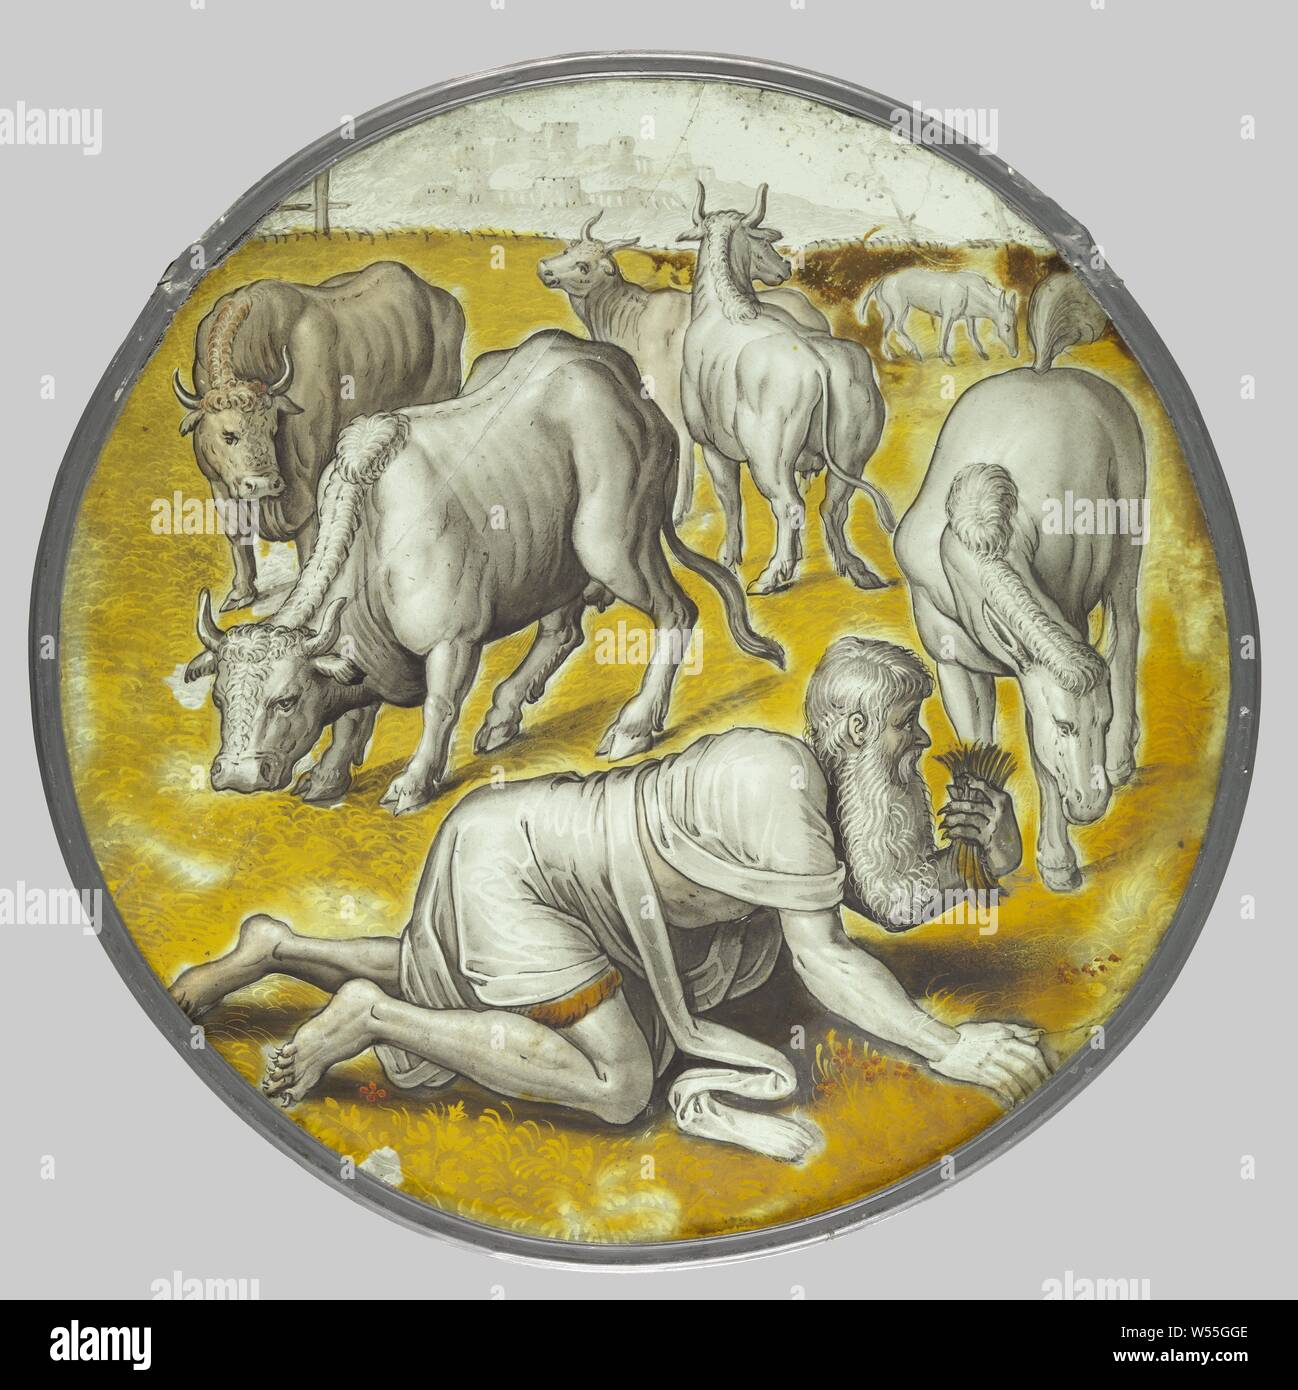 Nebuchadnezzar eats grass under the cows, King Nebuchadnezzar, has gone mad and lost his crown, crawls across the field to eat grass under the cows and horses. His nails have grown a long time., anonymous, Antwerp, c. 1560, glass, d 25.3 cm Stock Photo